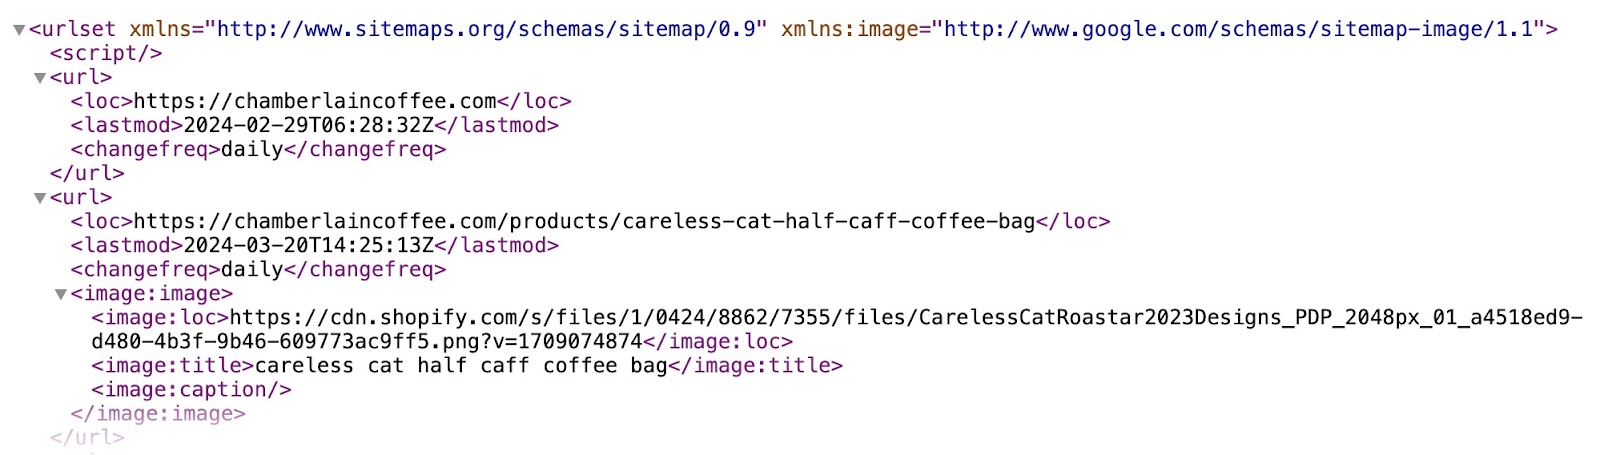 Nested xml tags that see  information  astir  assorted  URLs connected  a java  website